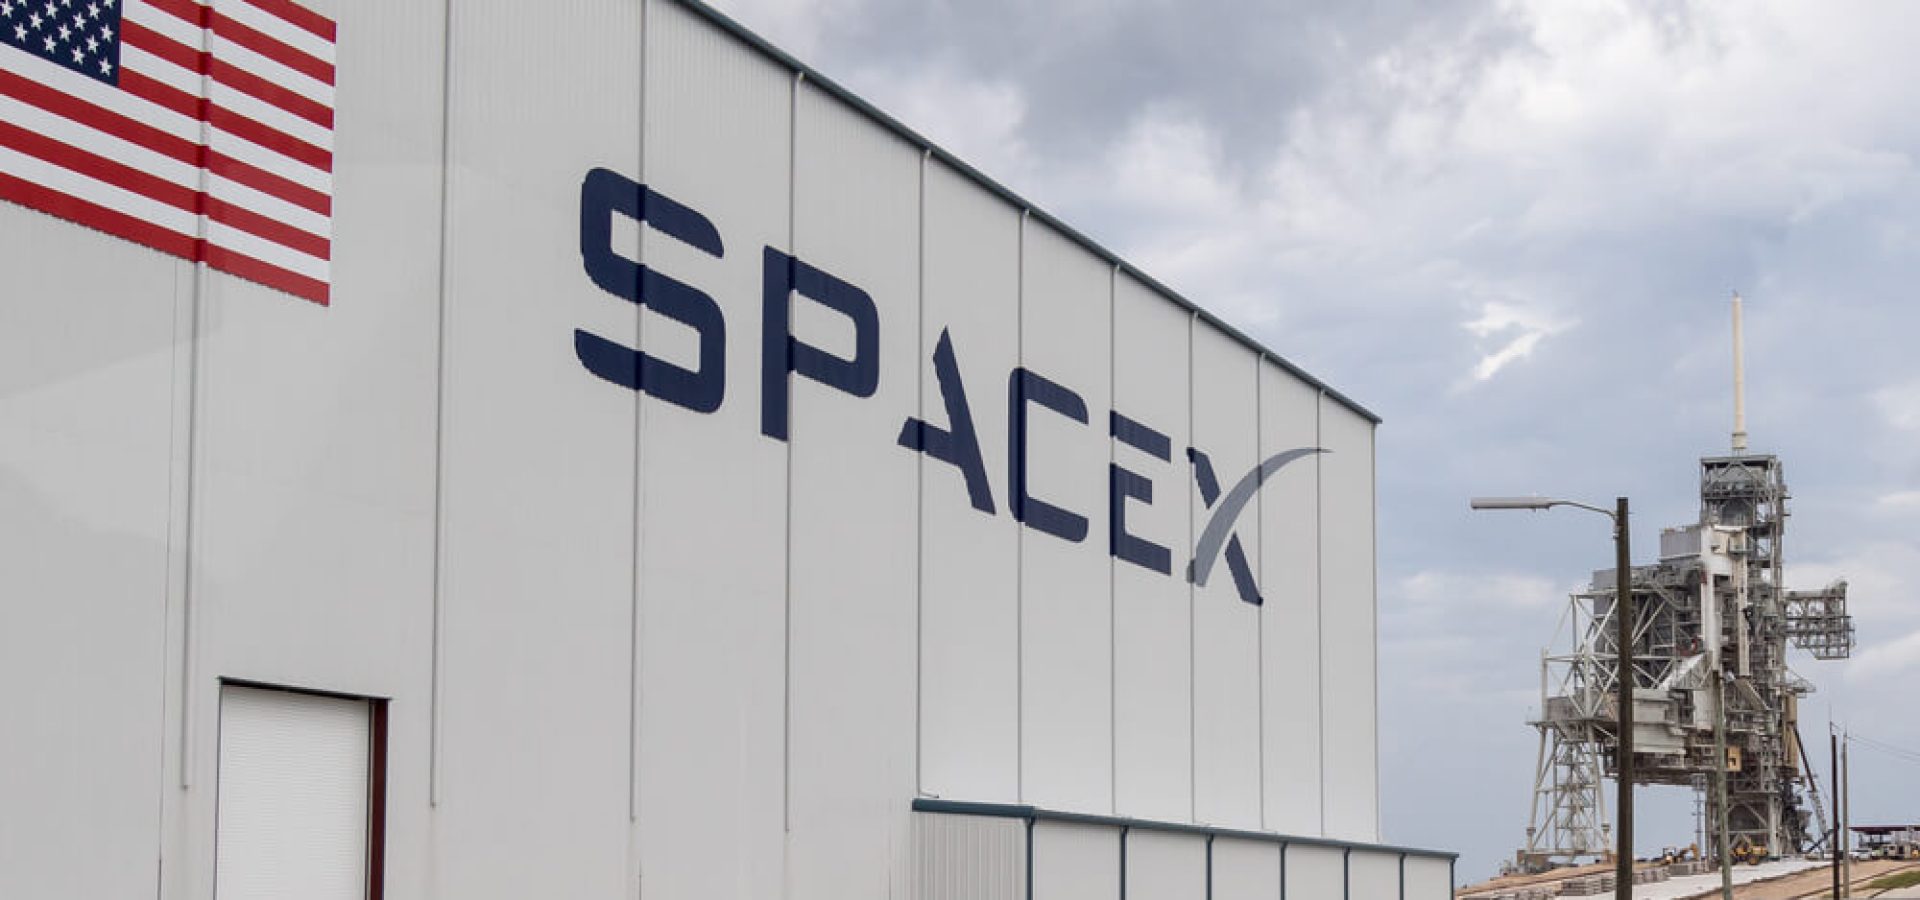 Spacex building